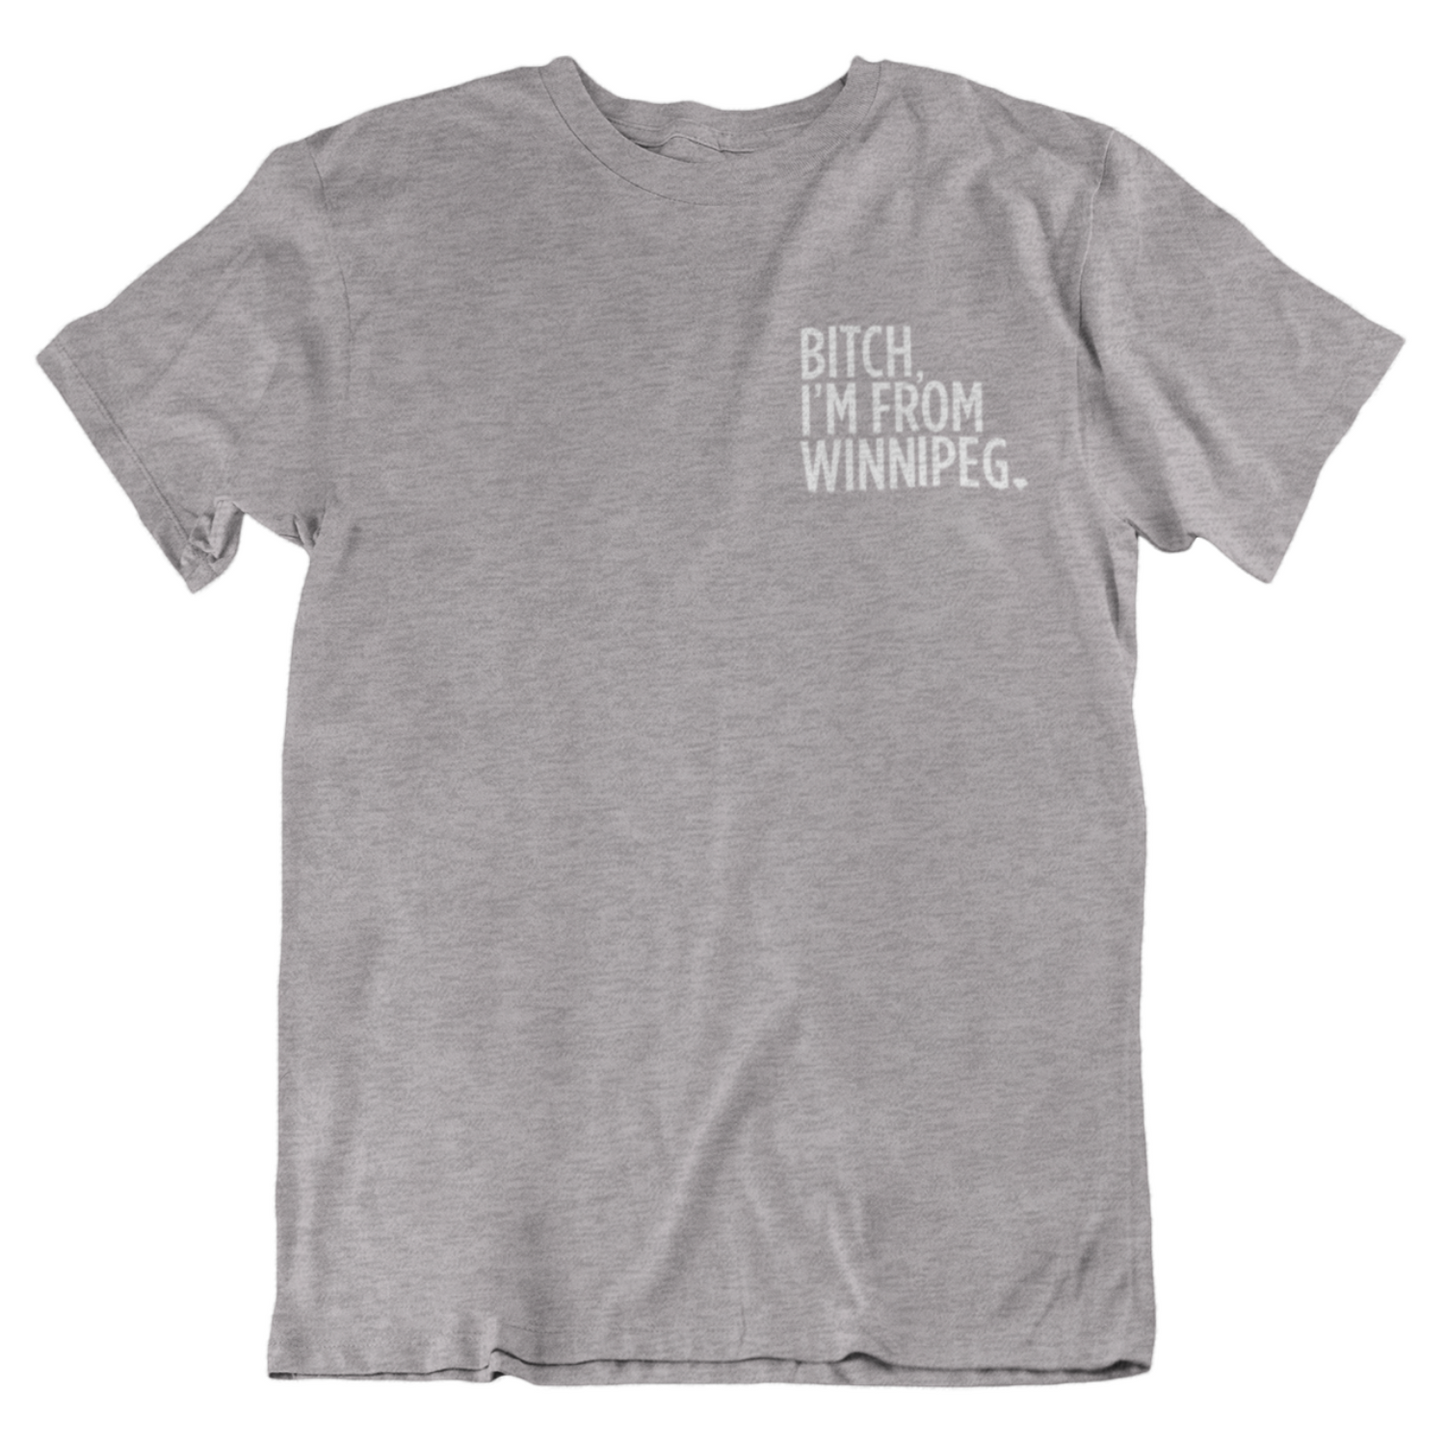 Bitch, I'm From Winnipeg Tee | White on Athletic Grey